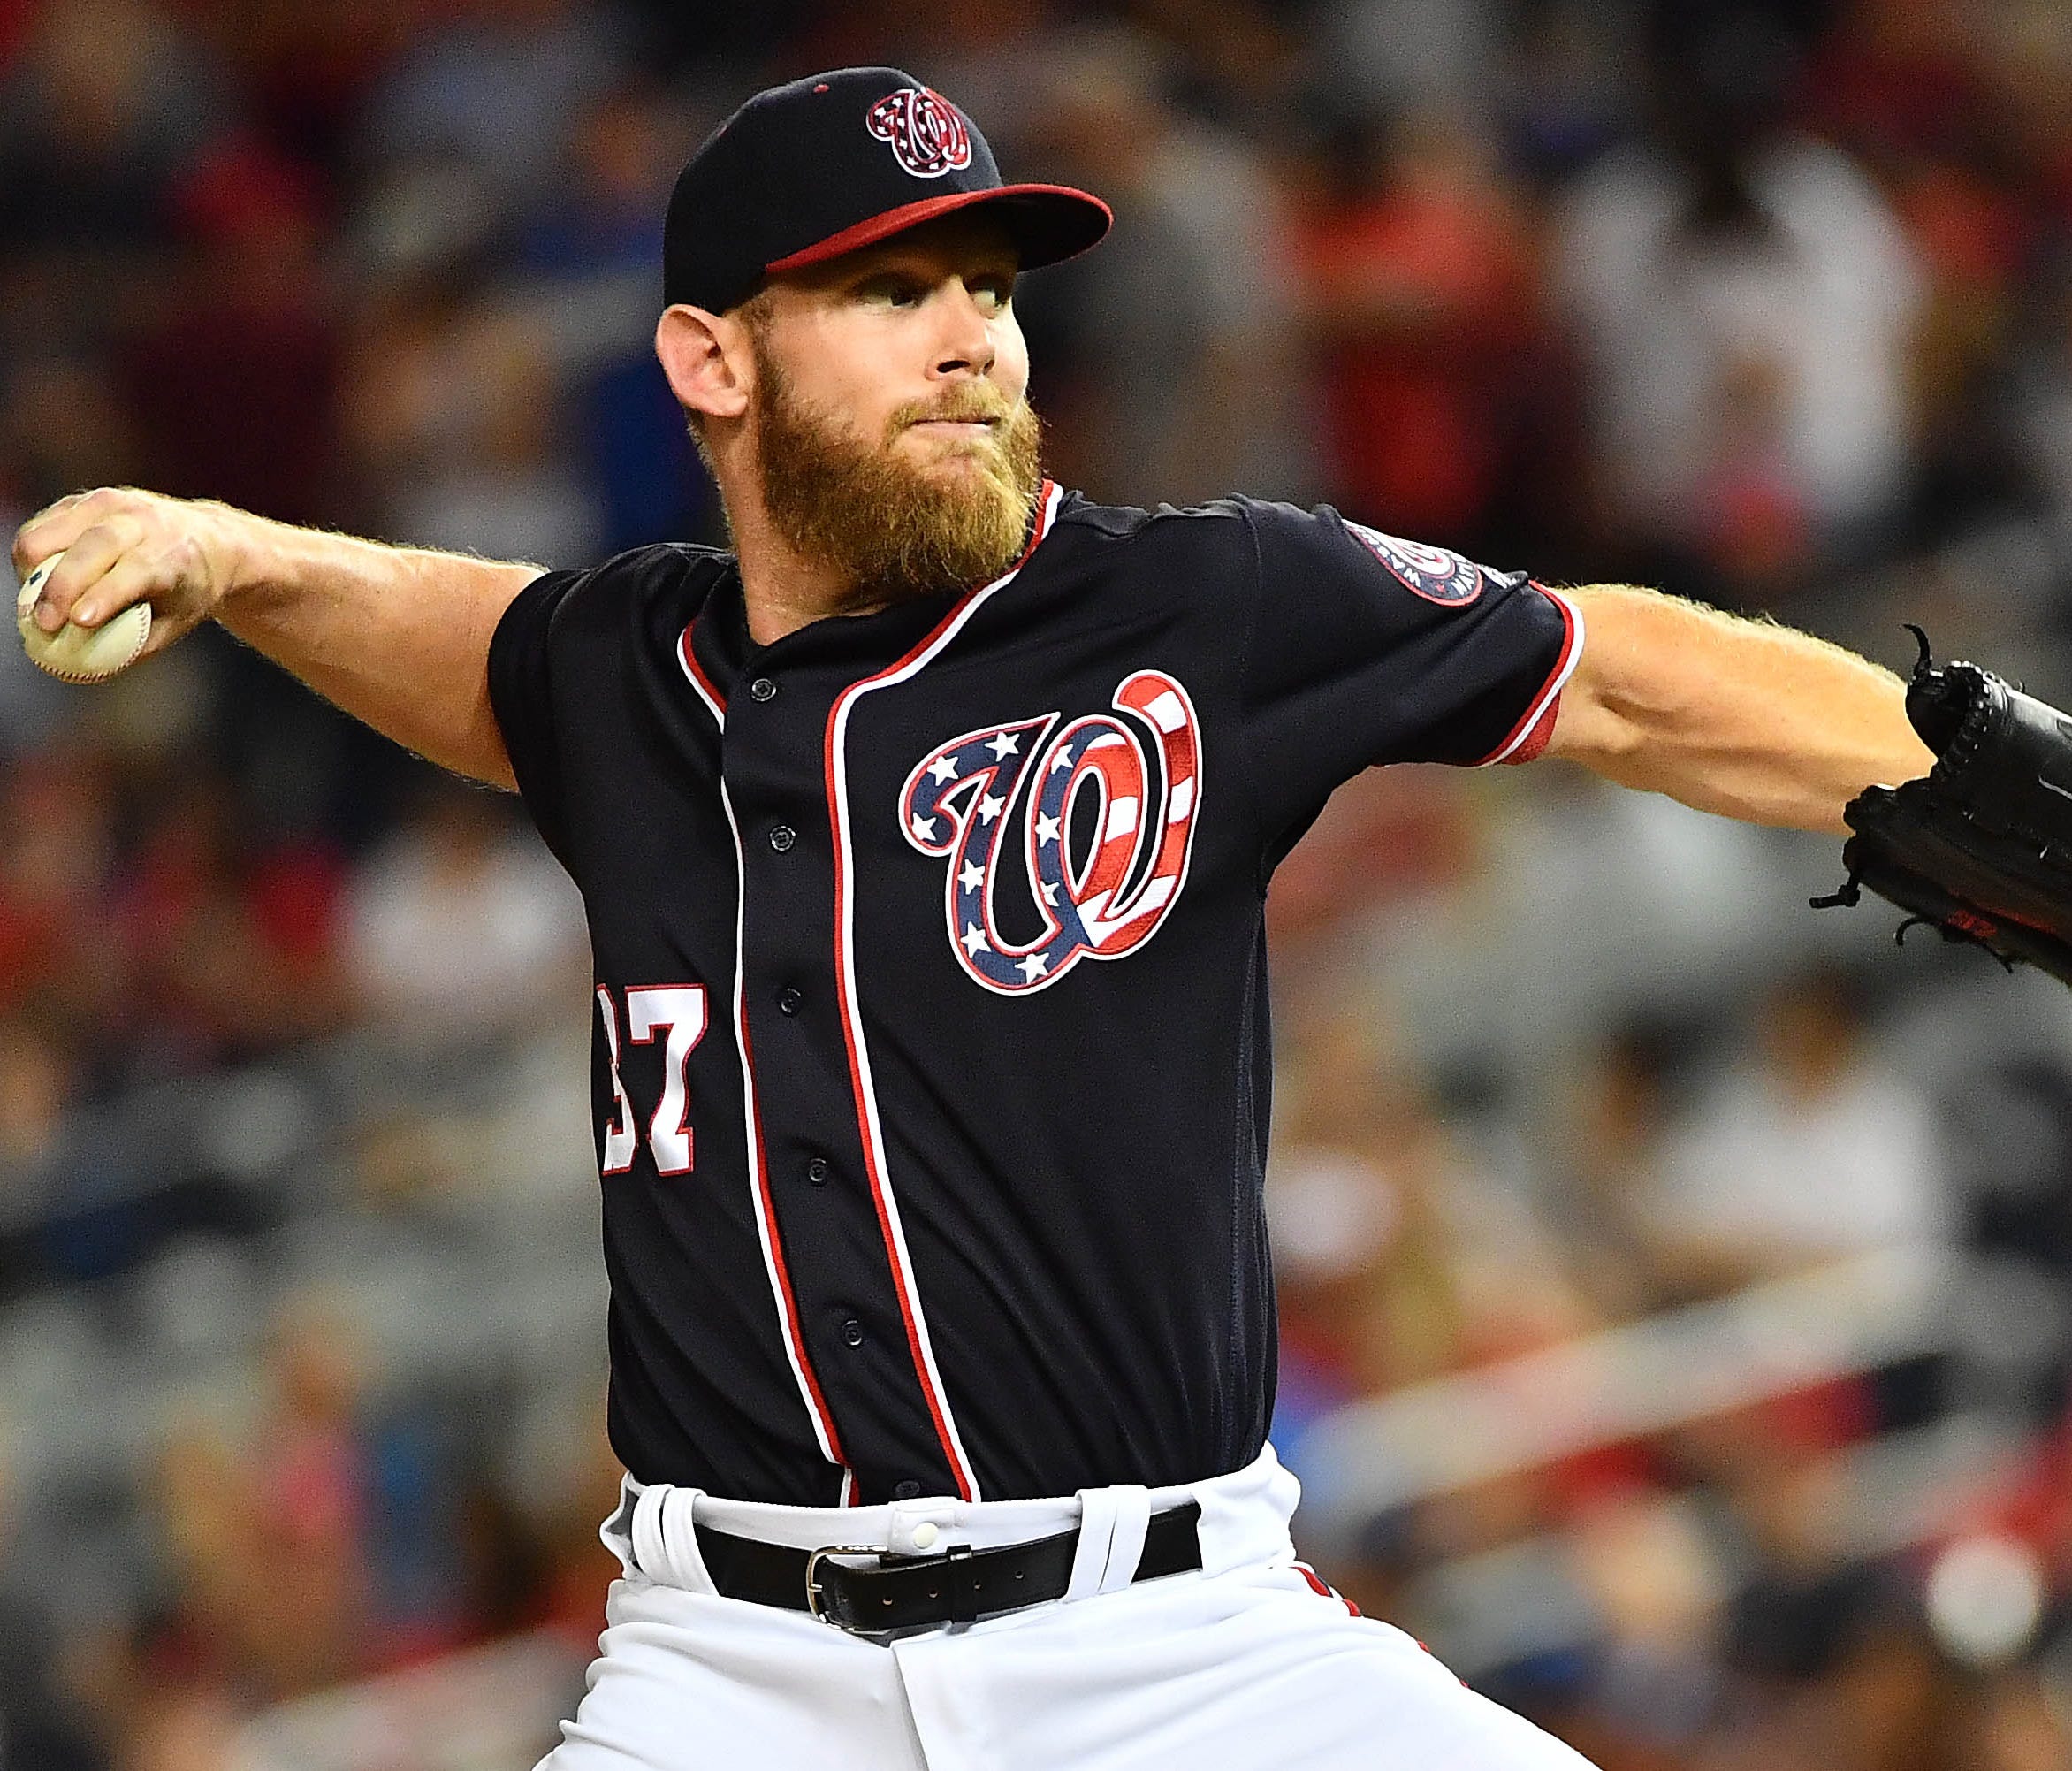 Stephen Strasburg allowed one run over six innings in the Nationals' win over the Dodgers.